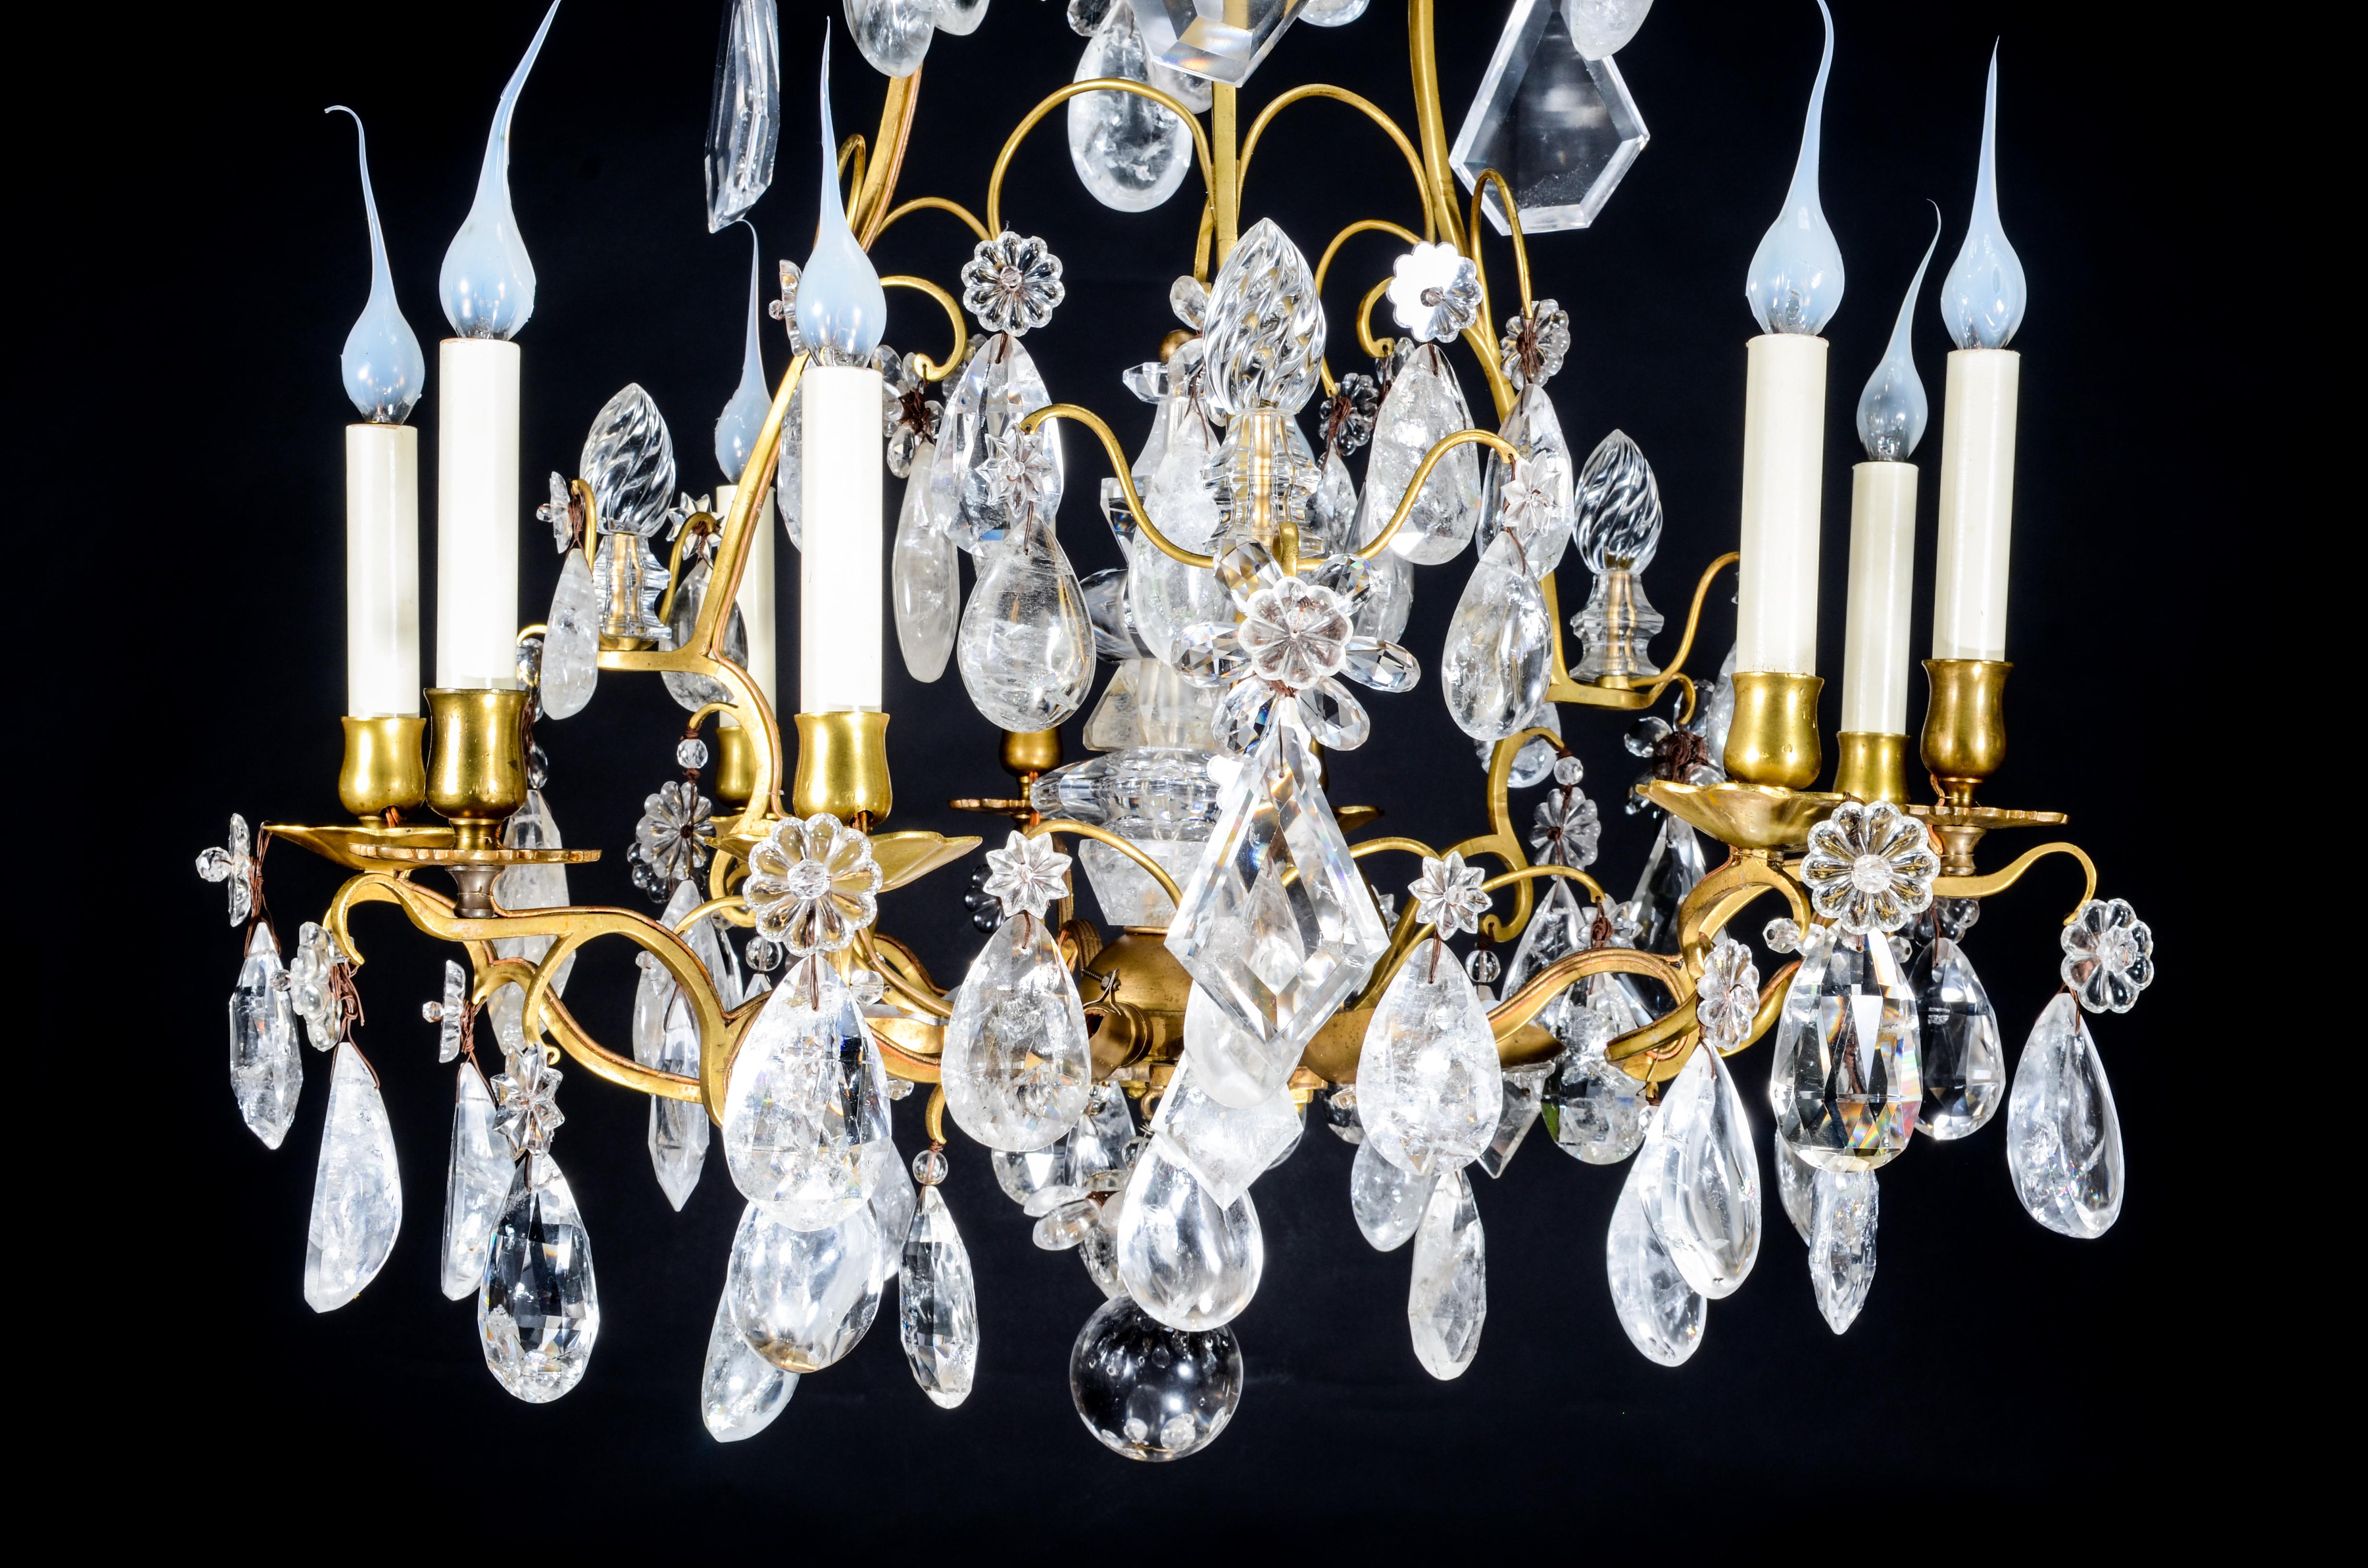 A Fine Antique French Louis XVI Style Gilt Bronze & Cut Rock Crystal Chandelier In Good Condition For Sale In New York, NY